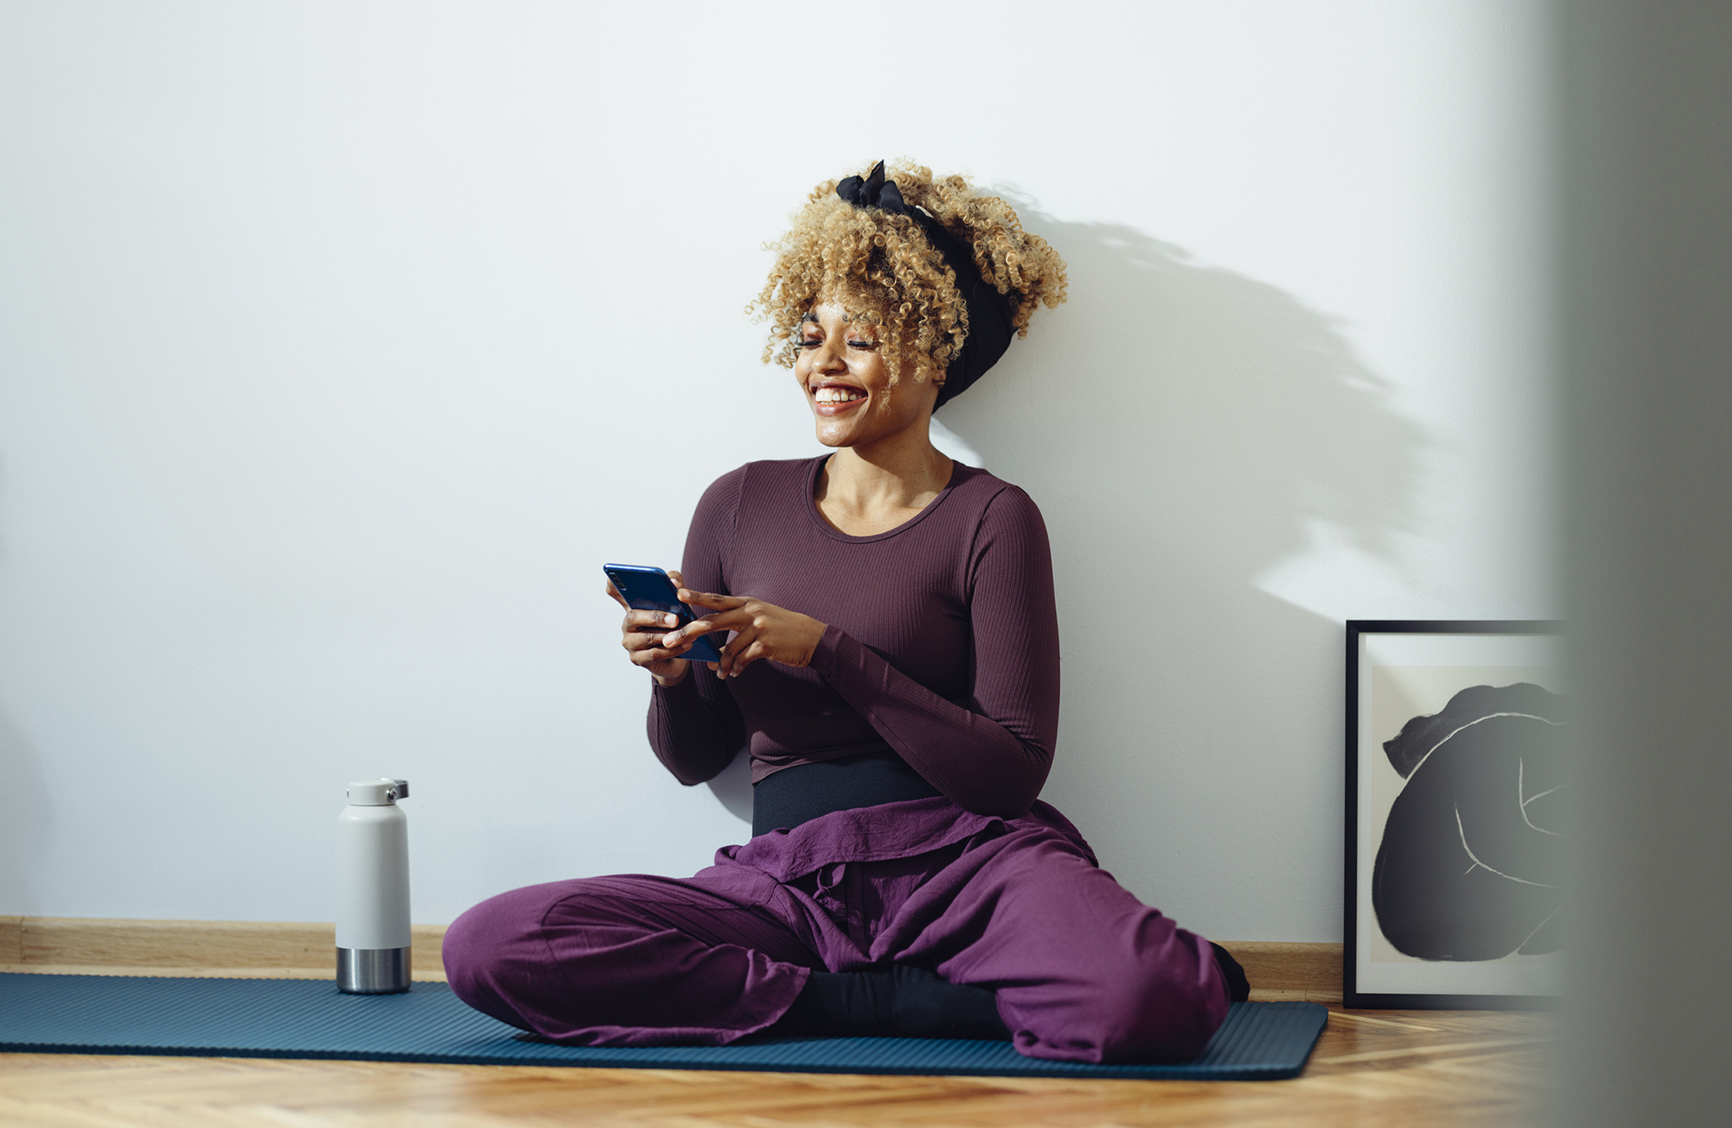 Afro-American woman is sitting on the yoga mat on the floor an holding her phone. She looks happy and trilled. She might be taking a break during an exercise session. She is in a fitness studio or in her room during the day and she might be a yoga student or an instructor. She is laughing.